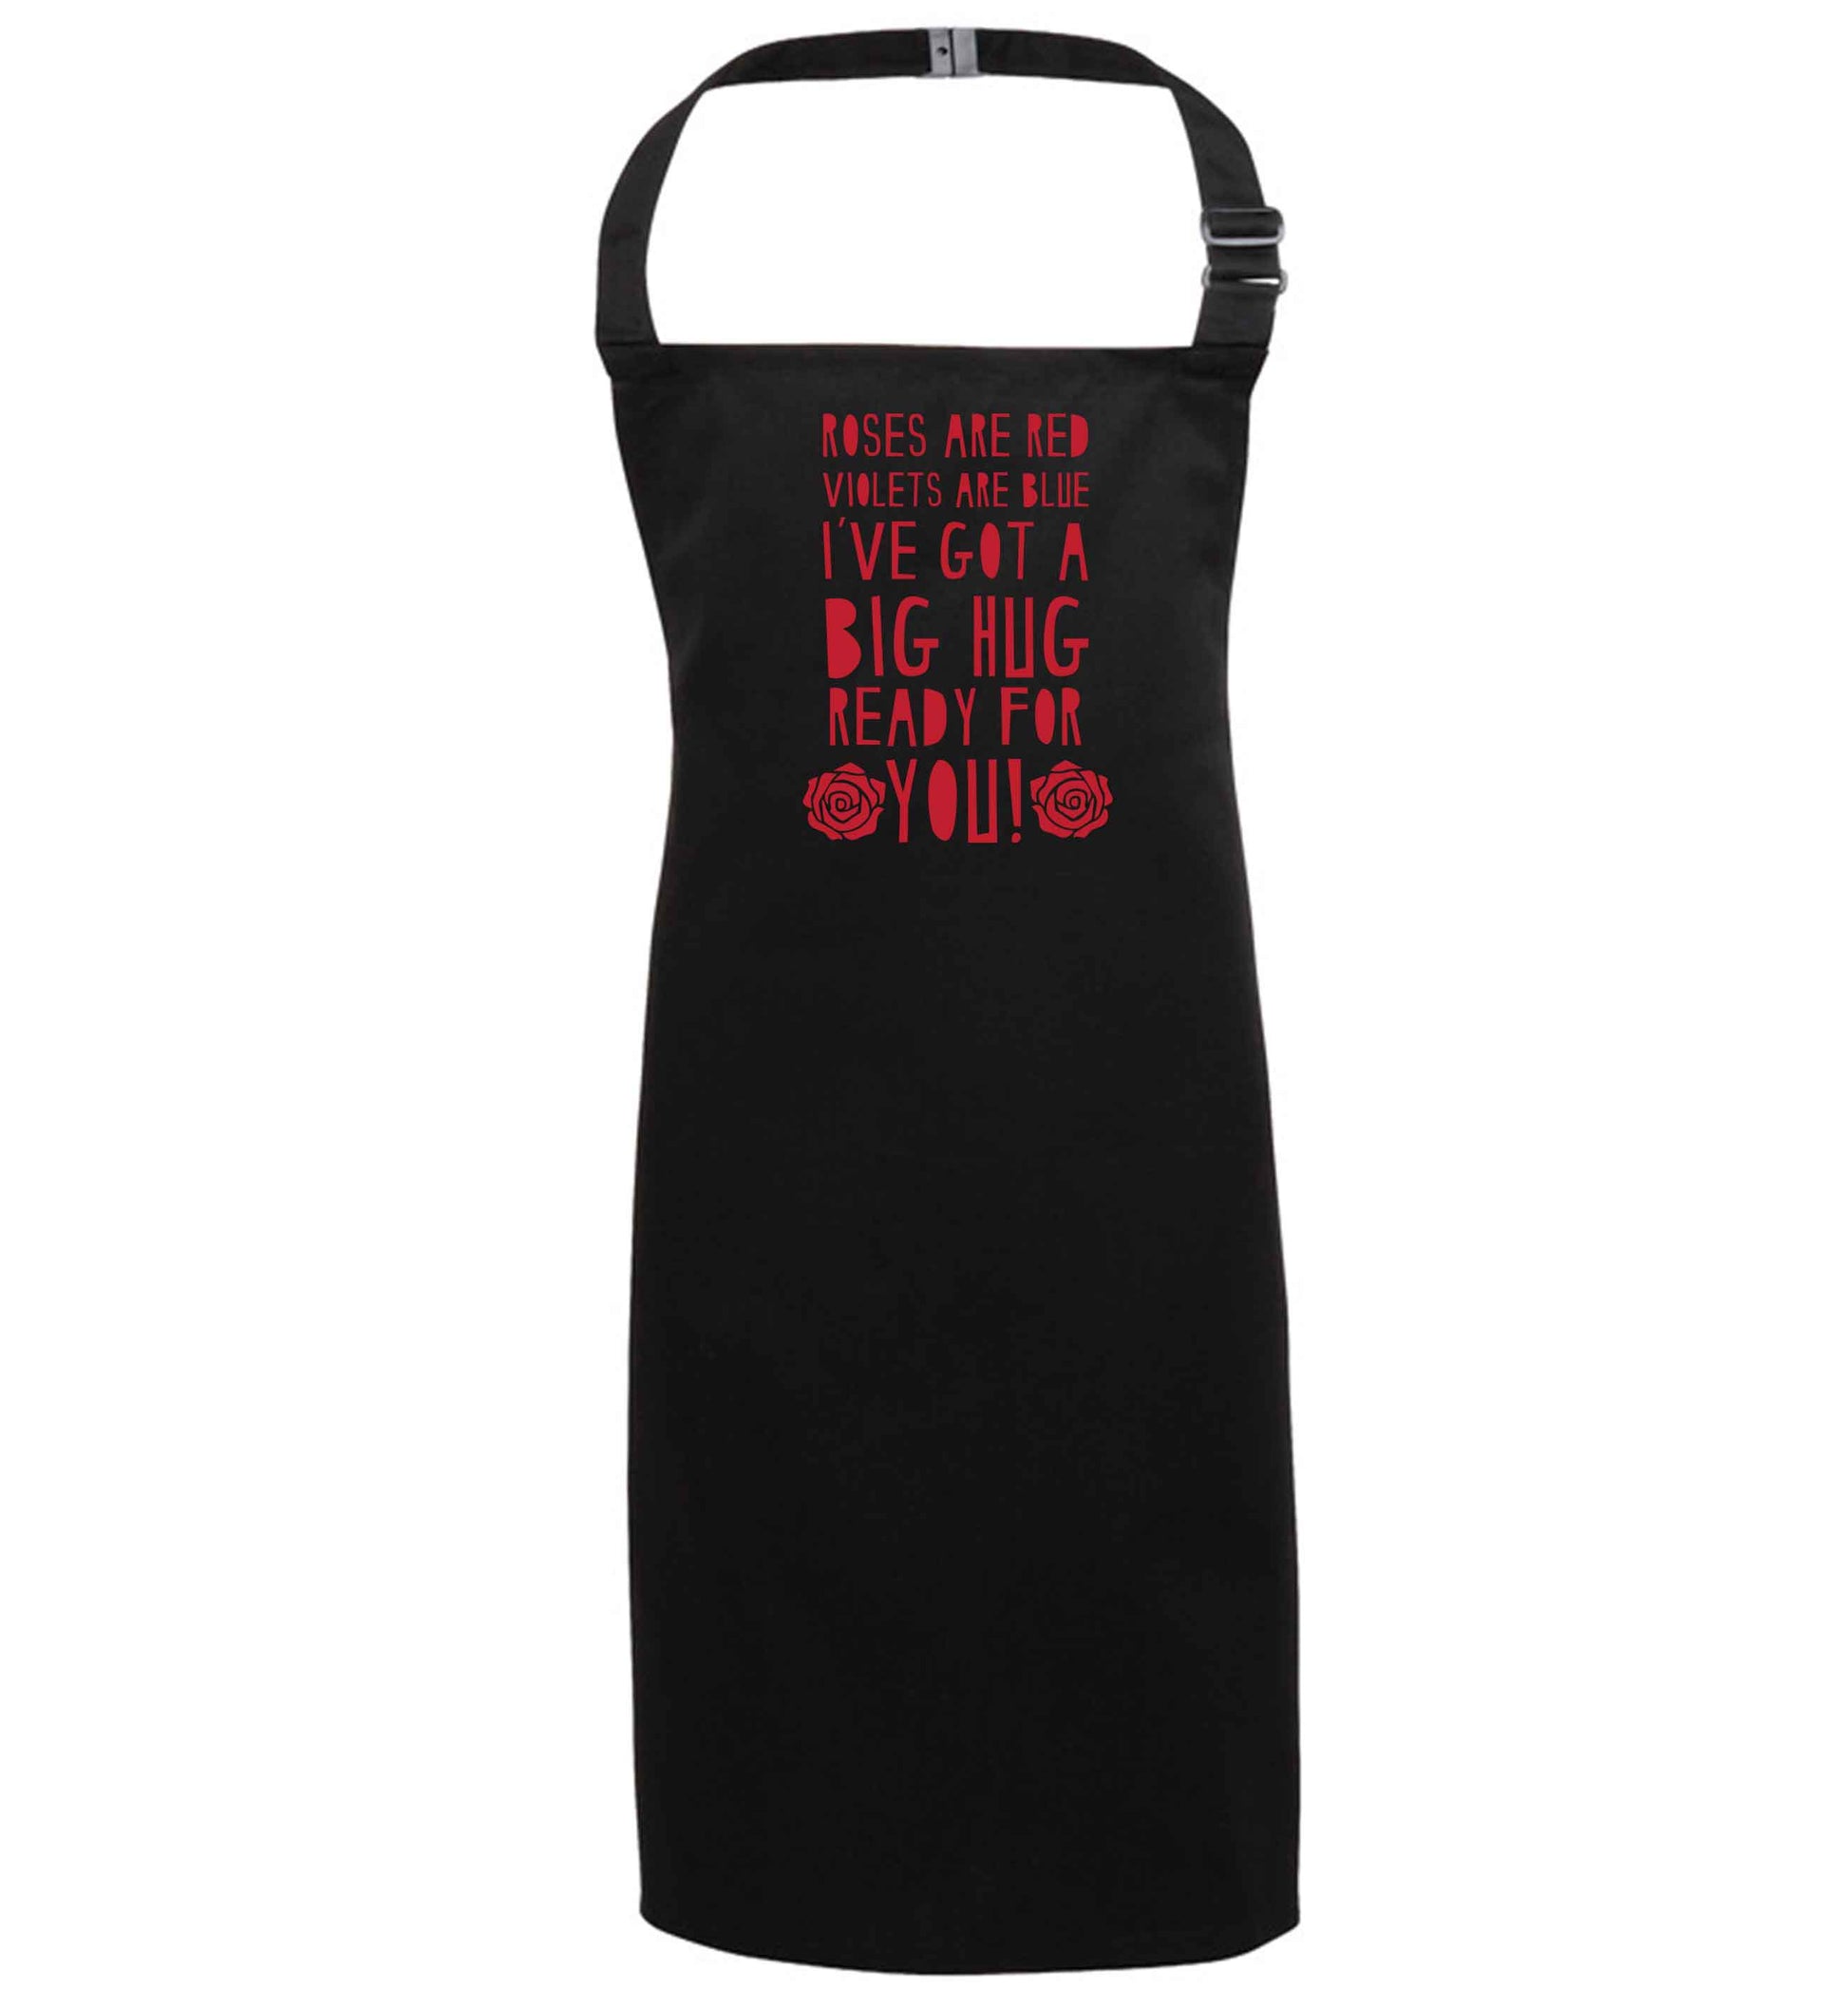 Roses are red violets are blue I've got a big hug coming for you black apron 7-10 years